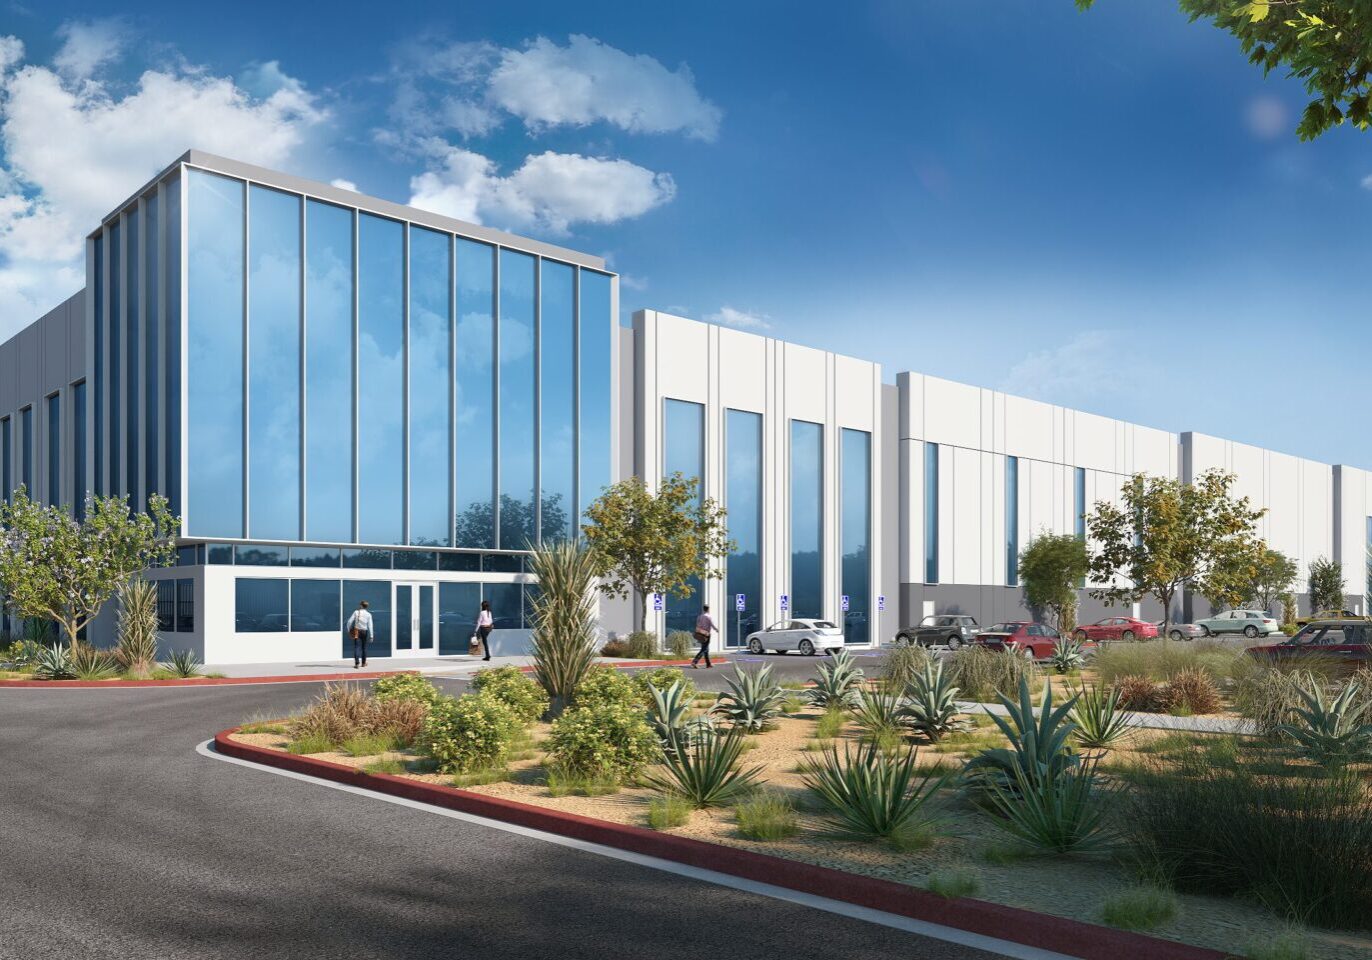 A rendering of the exterior of an office building.